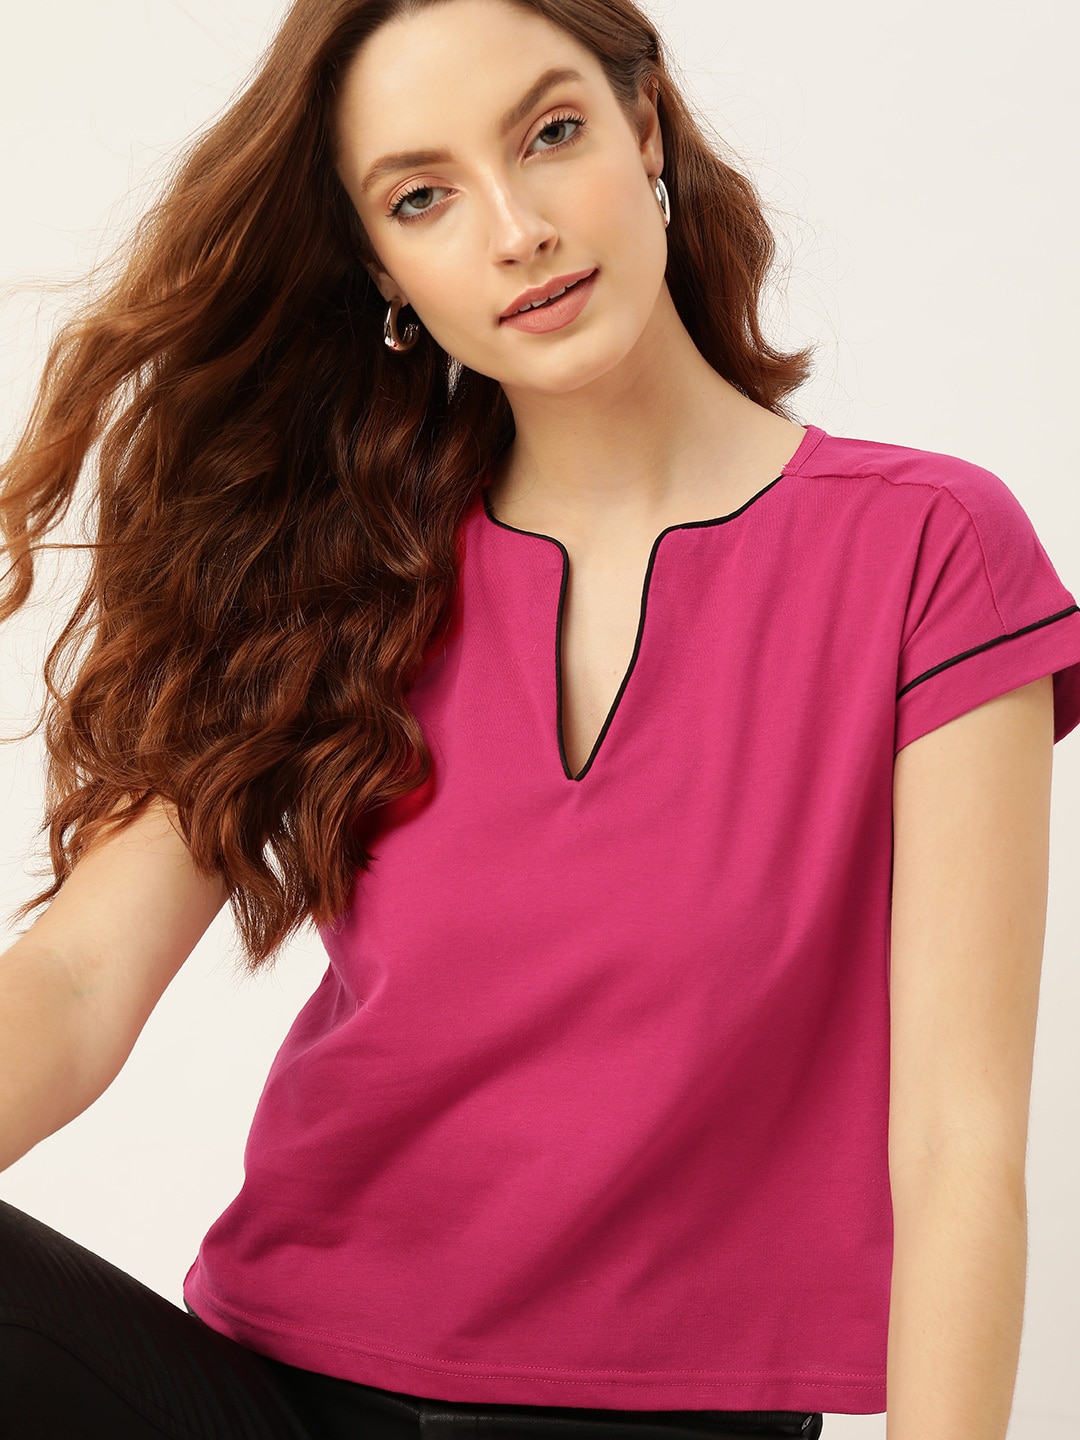 DressBerry Pink Solid Regular Top Price in India